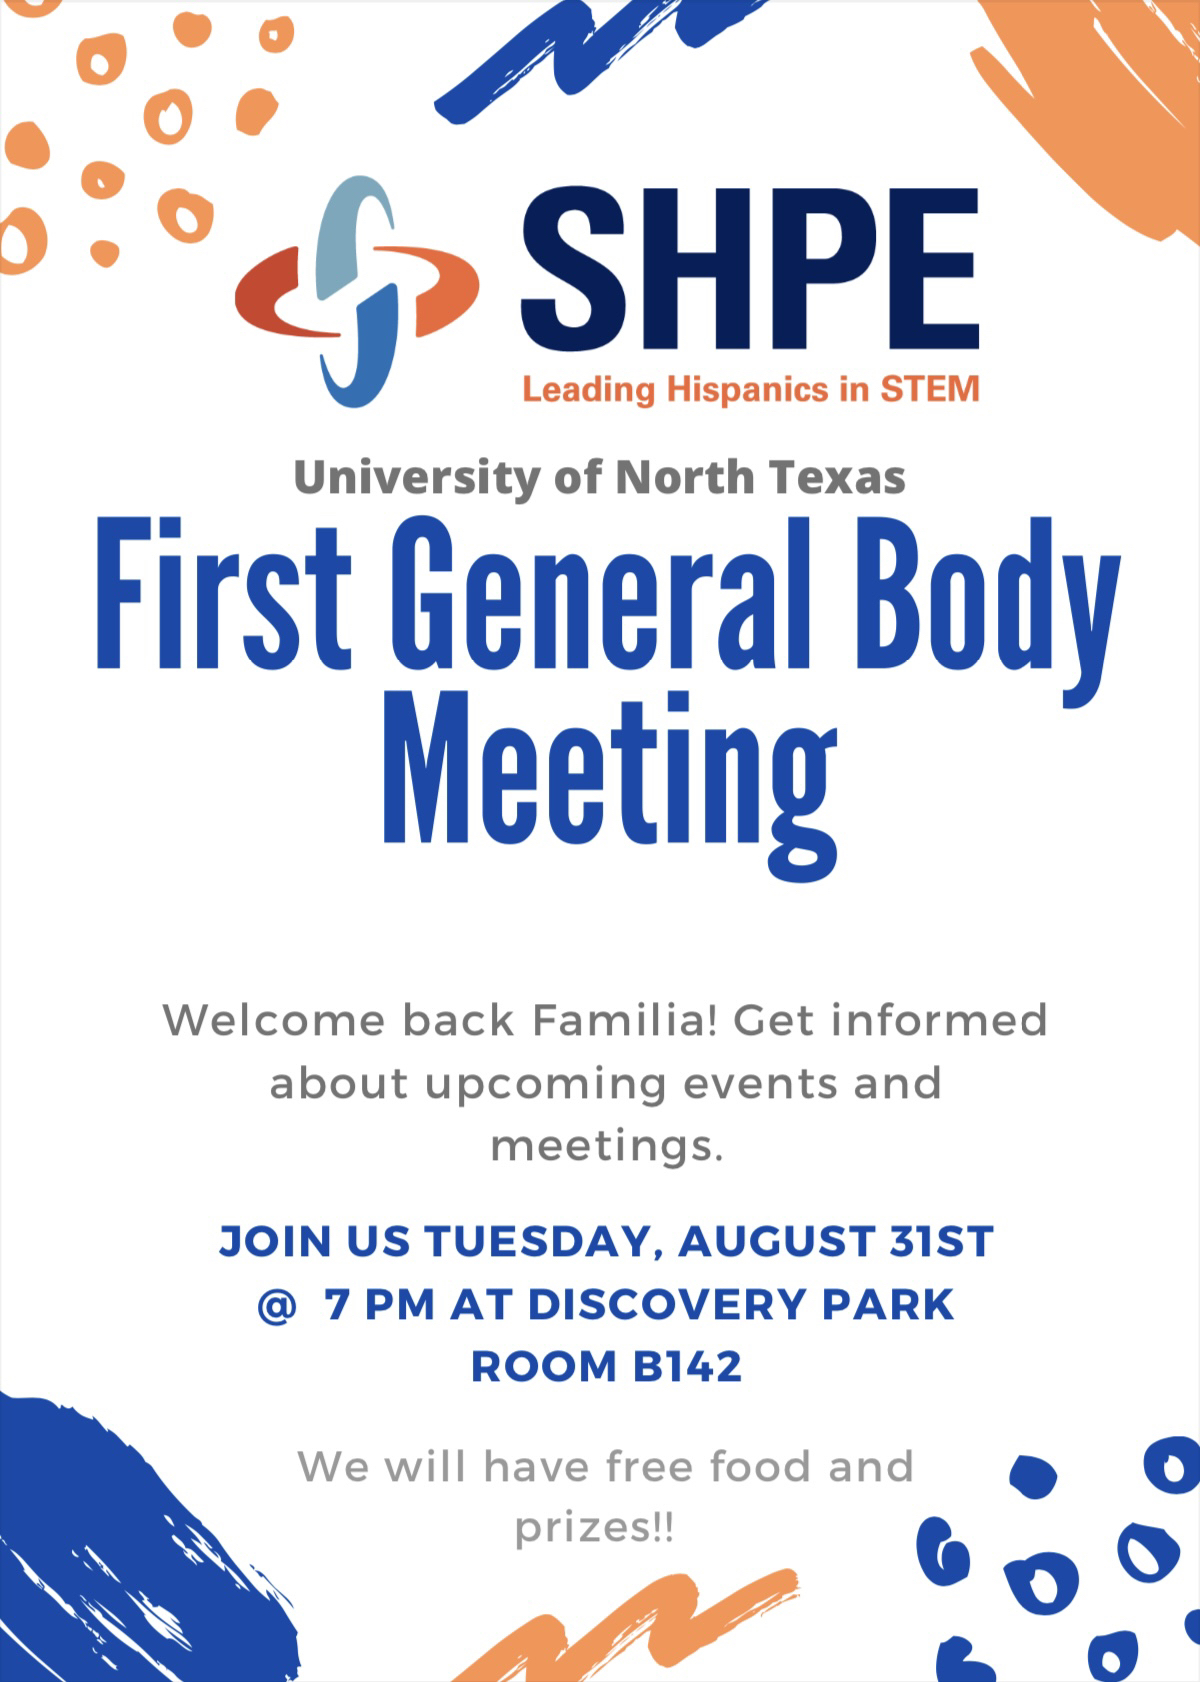 SHPE first general meeting flyer.jpeg